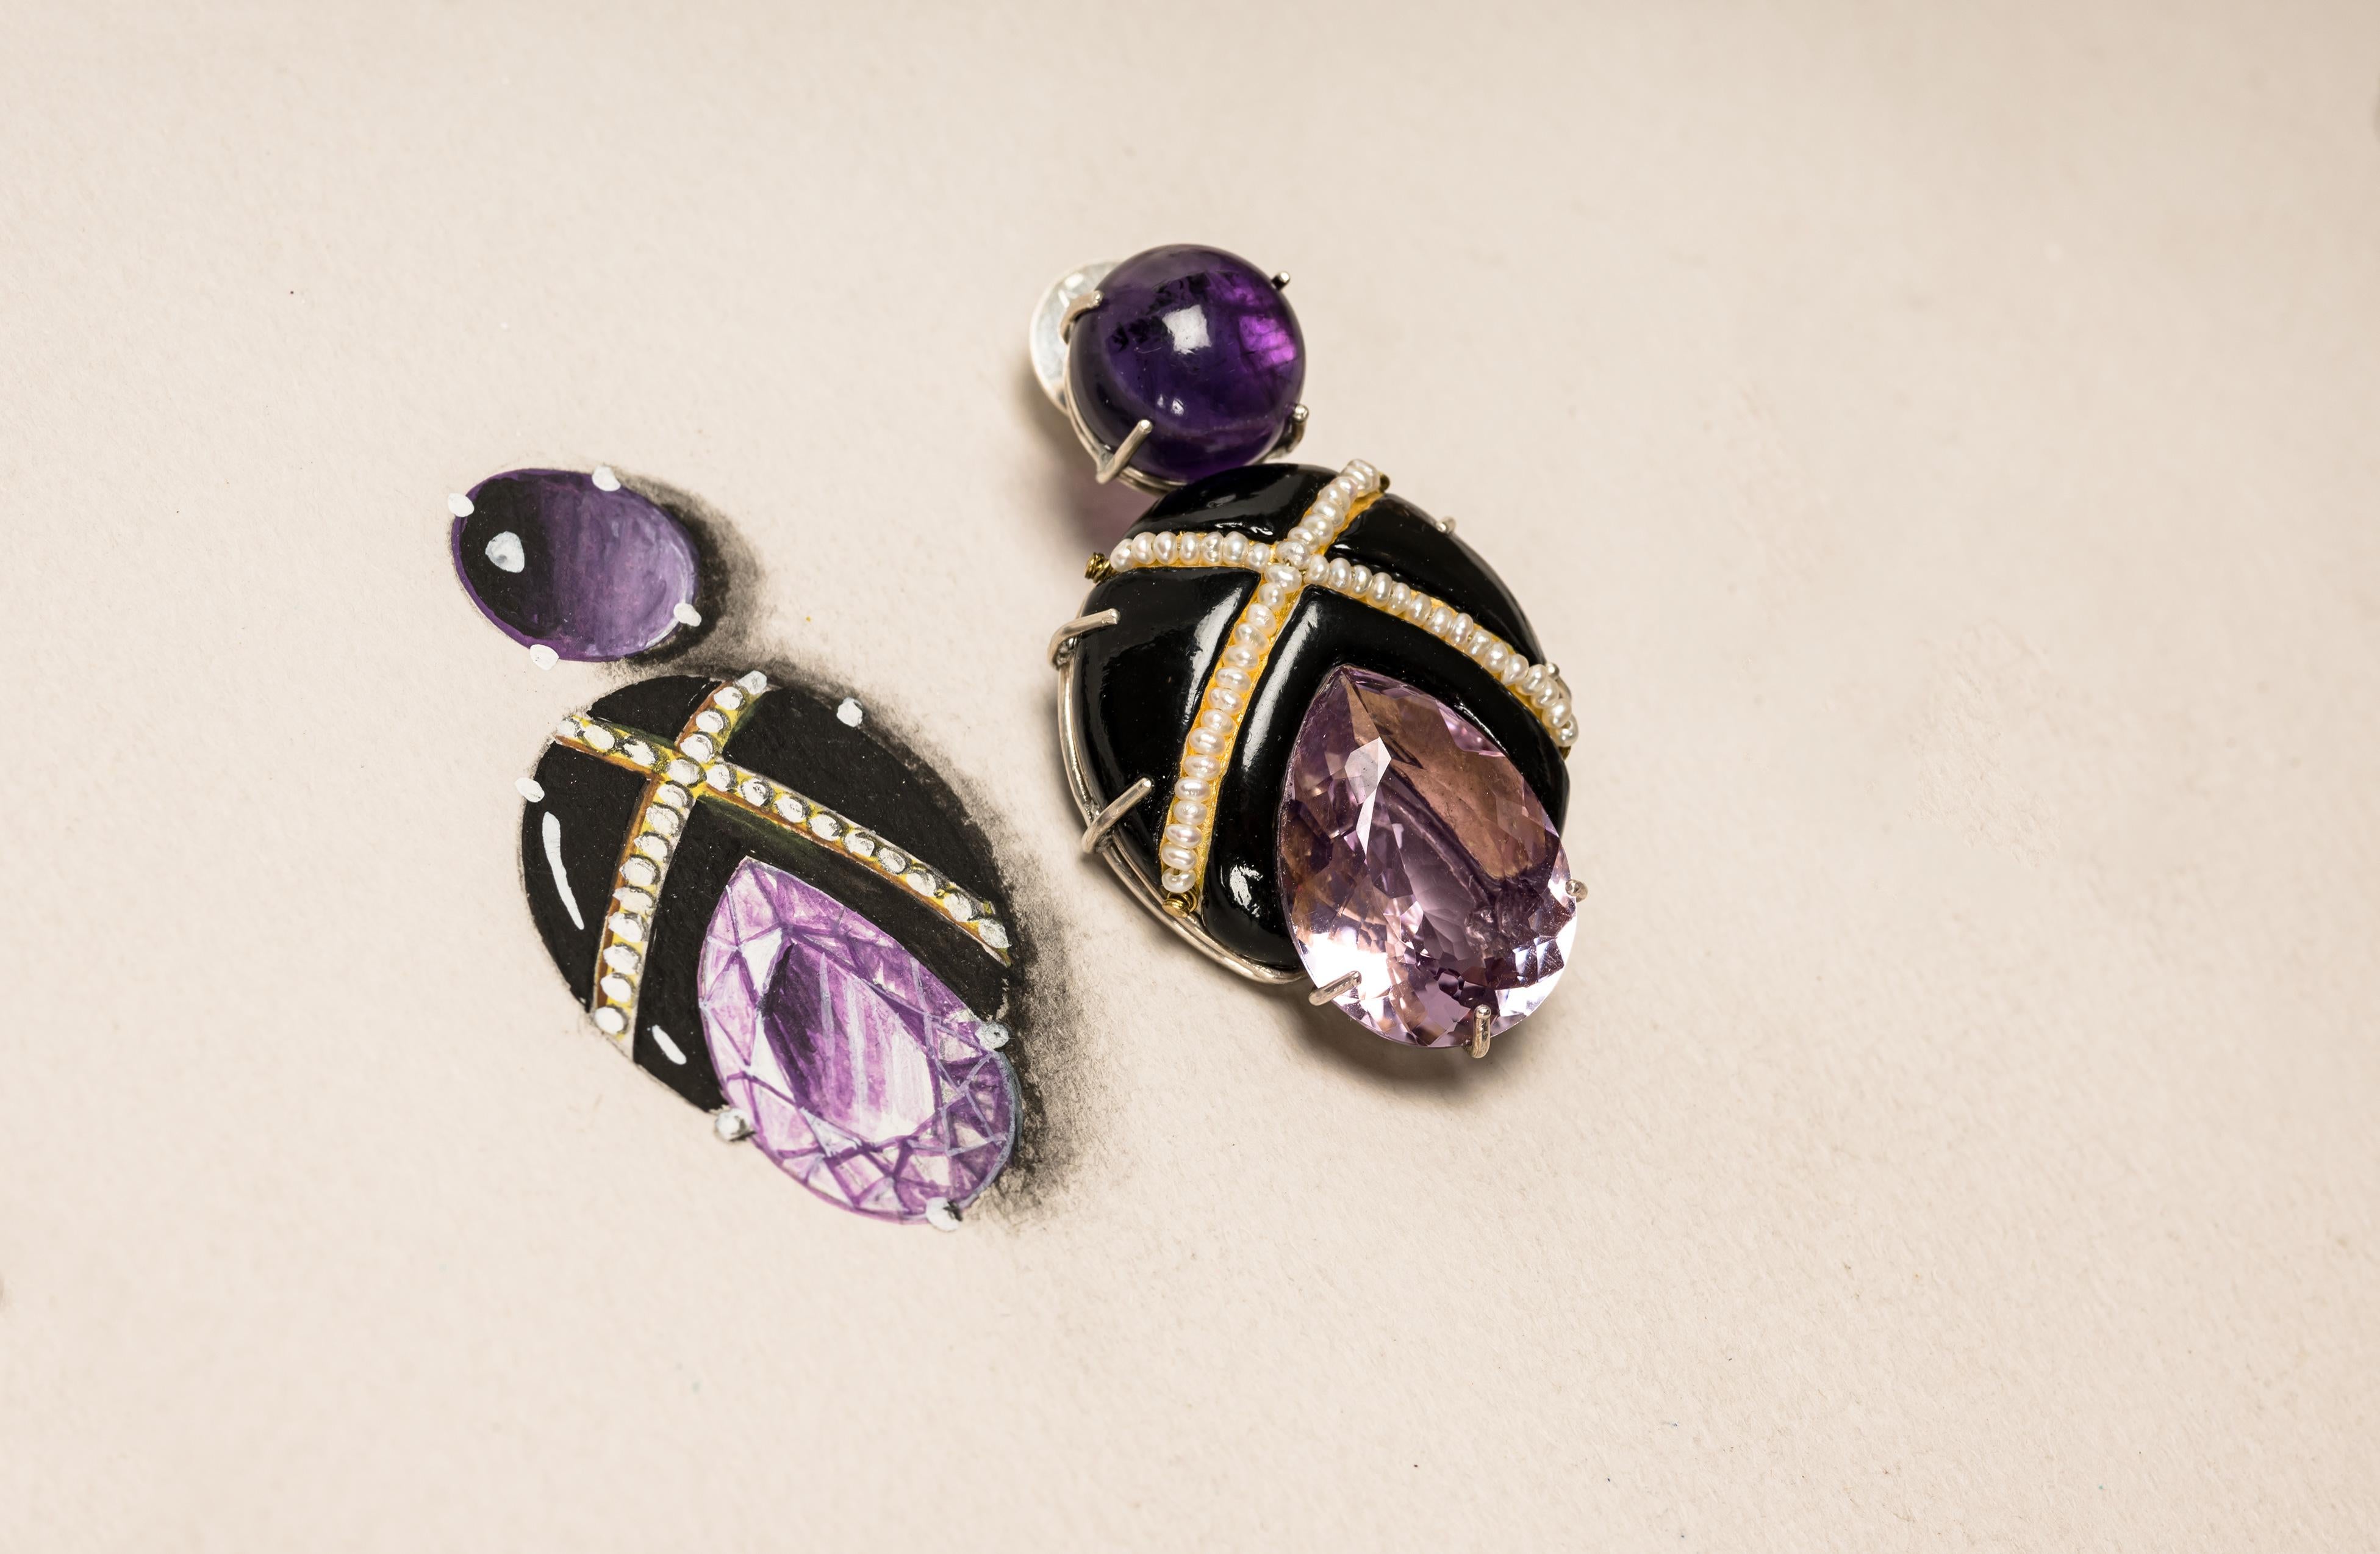 Bodyfurnitures Stud Earrings Papier-mâché, Amethysts, Pearls, Gold, Silver In New Condition For Sale In Bolzano, BZ